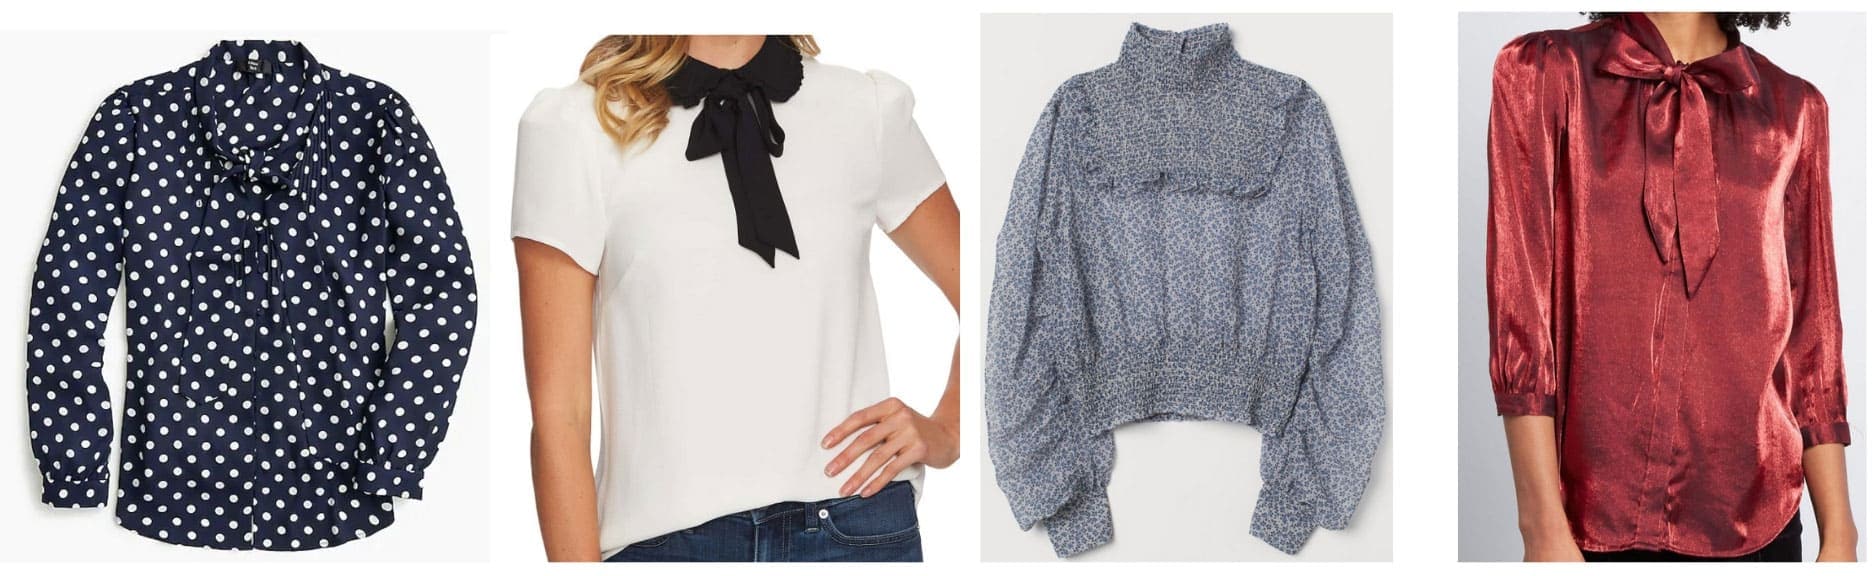 Preppy style 101: Girly blouses